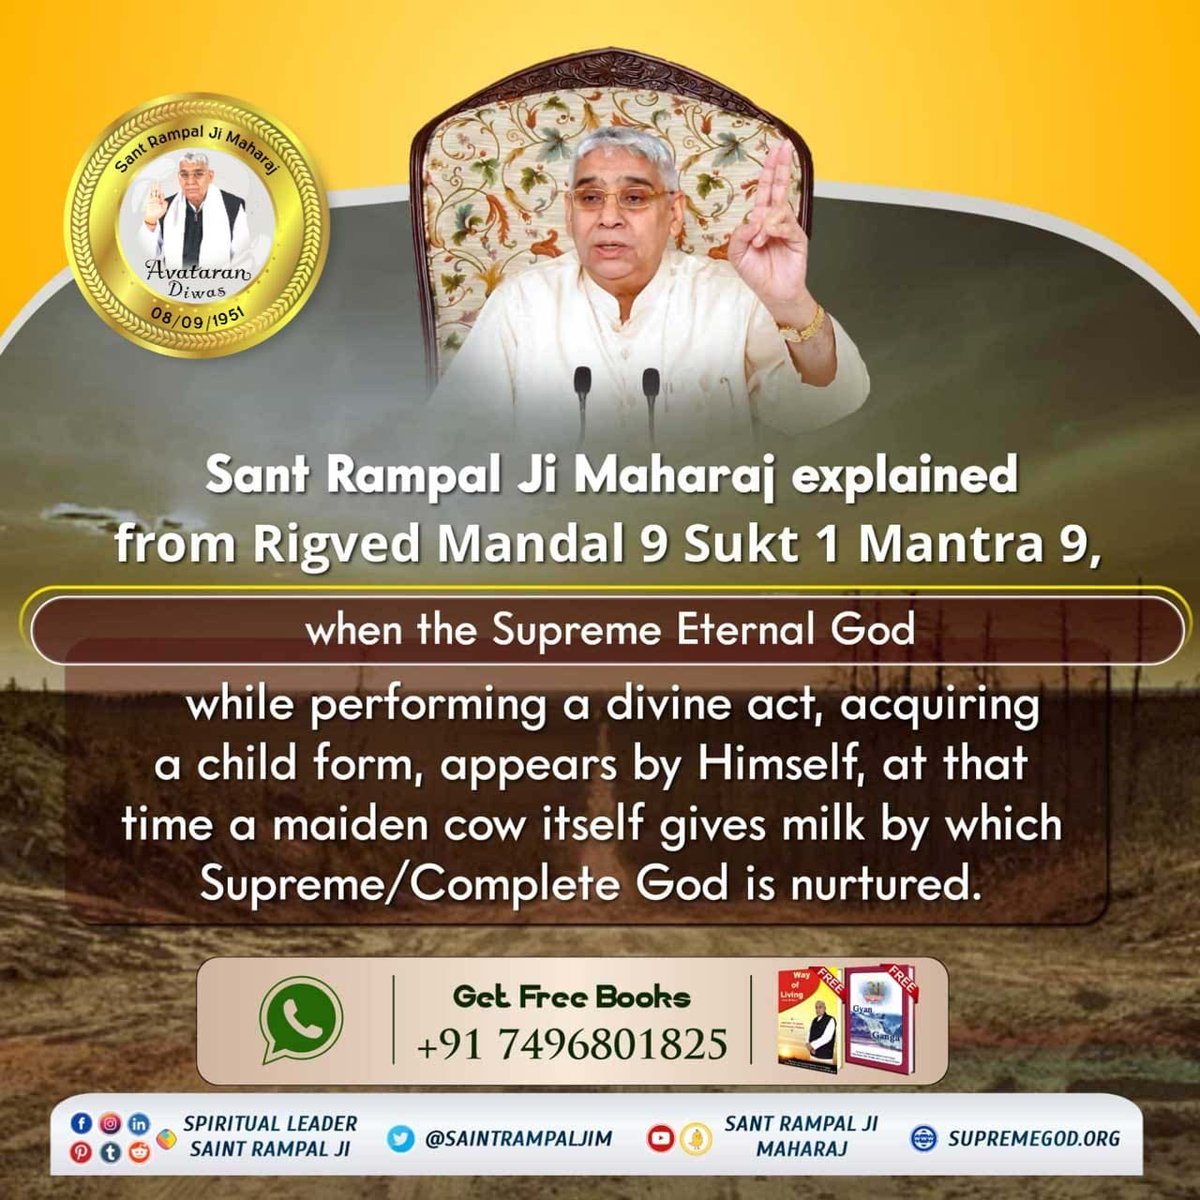 #GodNightSunday #जगत_उद्धारक_संत_रामपालजी while performing a divine act, acquiring a child form, appears by Himself, at that time a maiden cow itself gives milk by which Supreme/Complete God is nurtured.